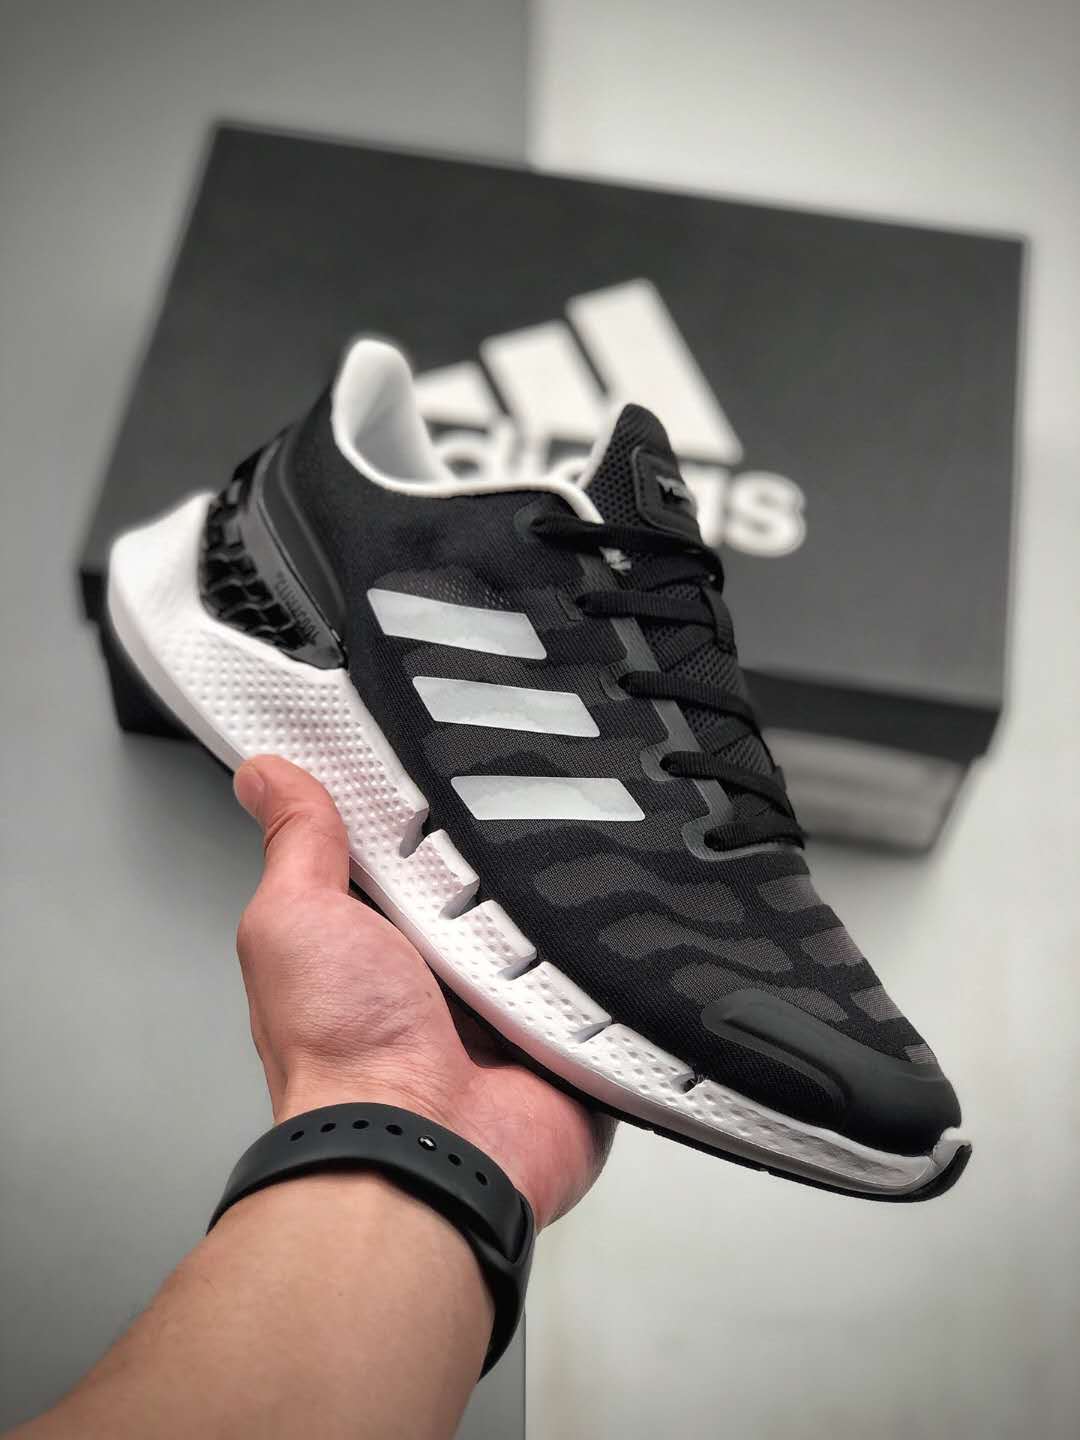 adidas Climacool Core Black Cloud White FW1223 - Stylish and Breathable Athletic Sneakers